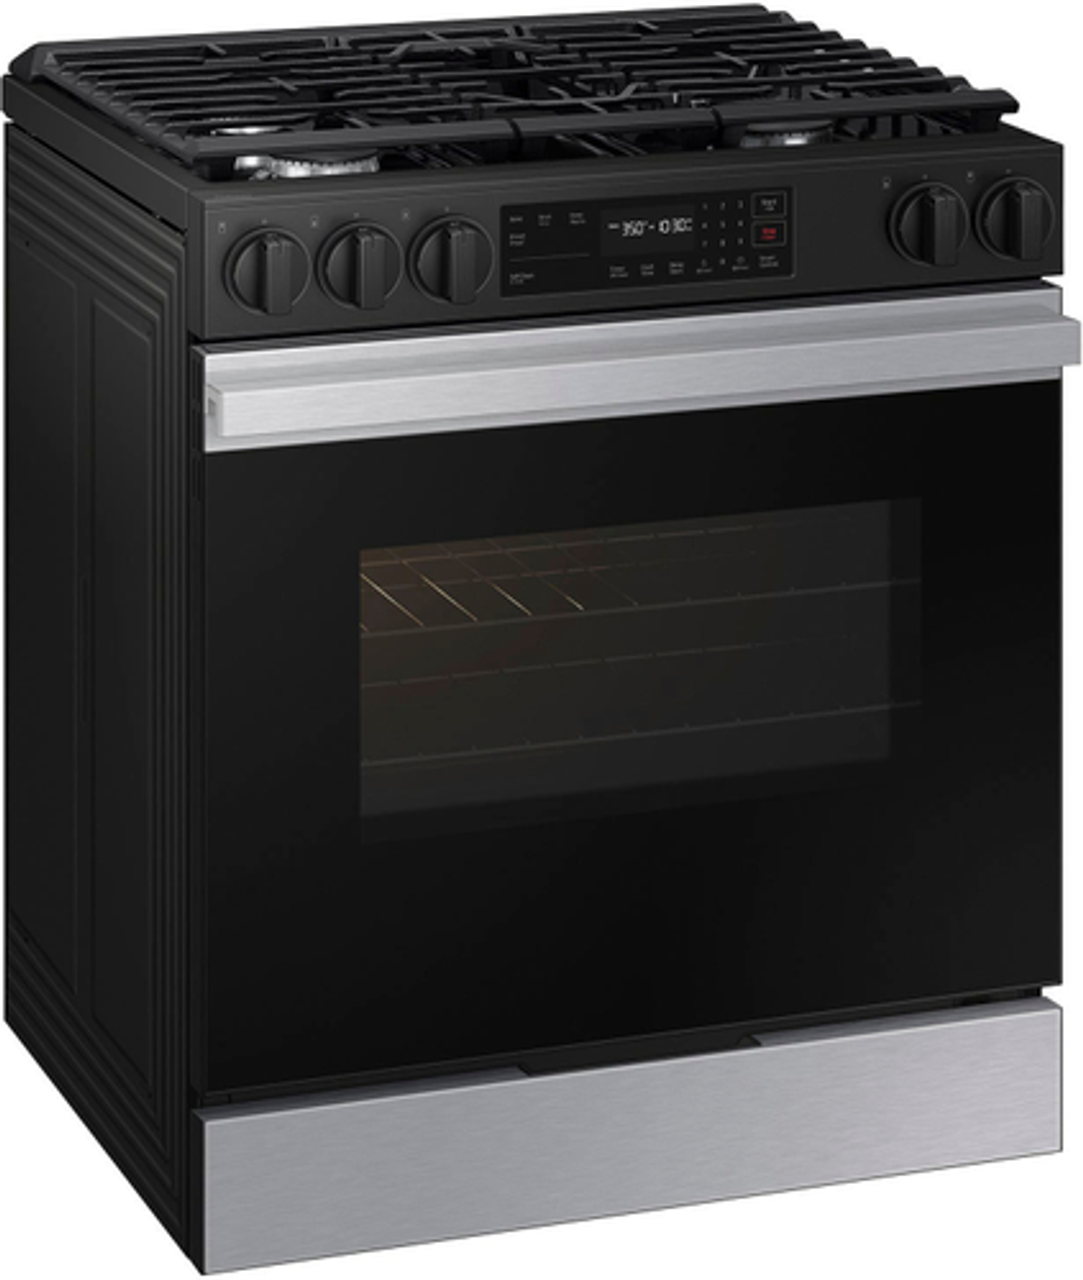 Samsung - Bespoke 6.0 Cu. Ft. Slide-In Gas Range with Precision Knobs - Stainless Steel